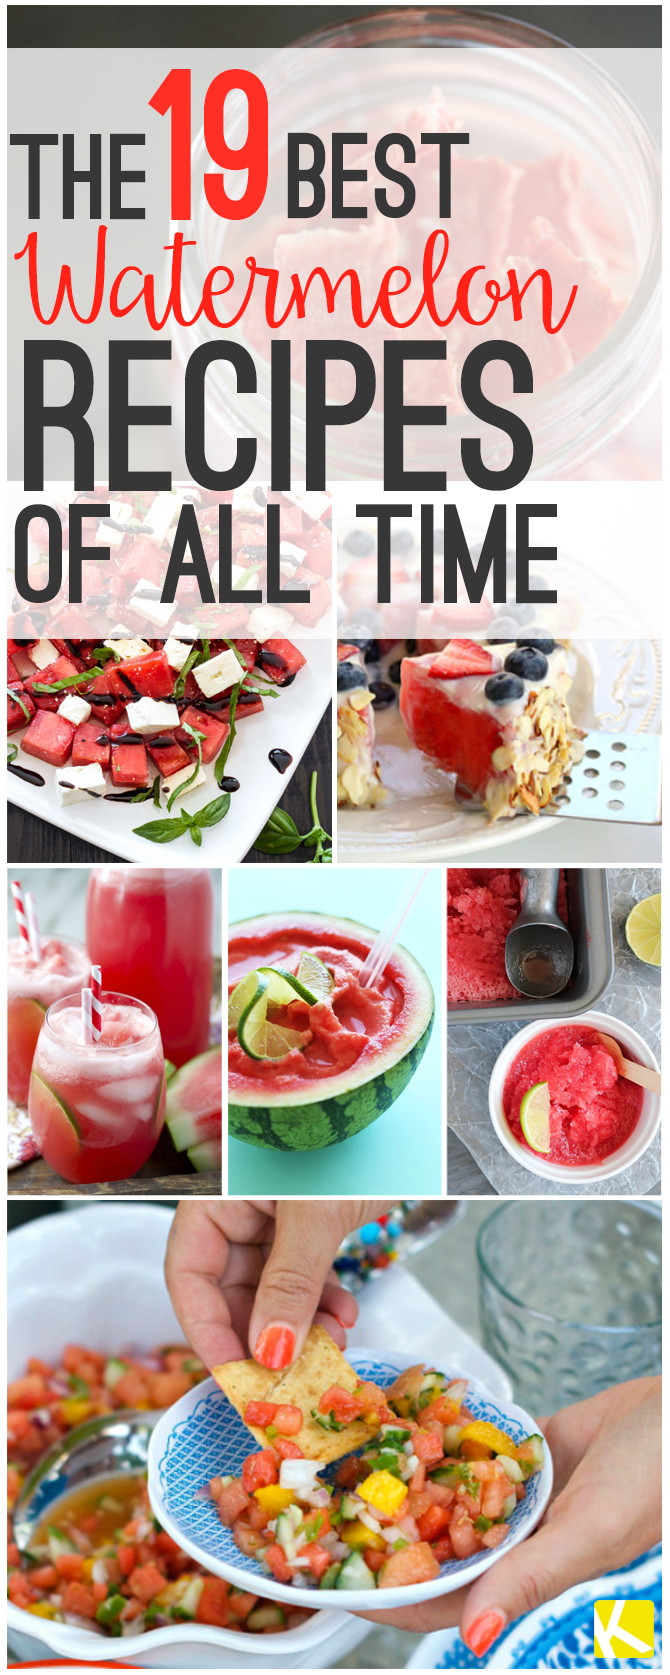 The 19 Best Watermelon Recipes of All Time - The Krazy ...